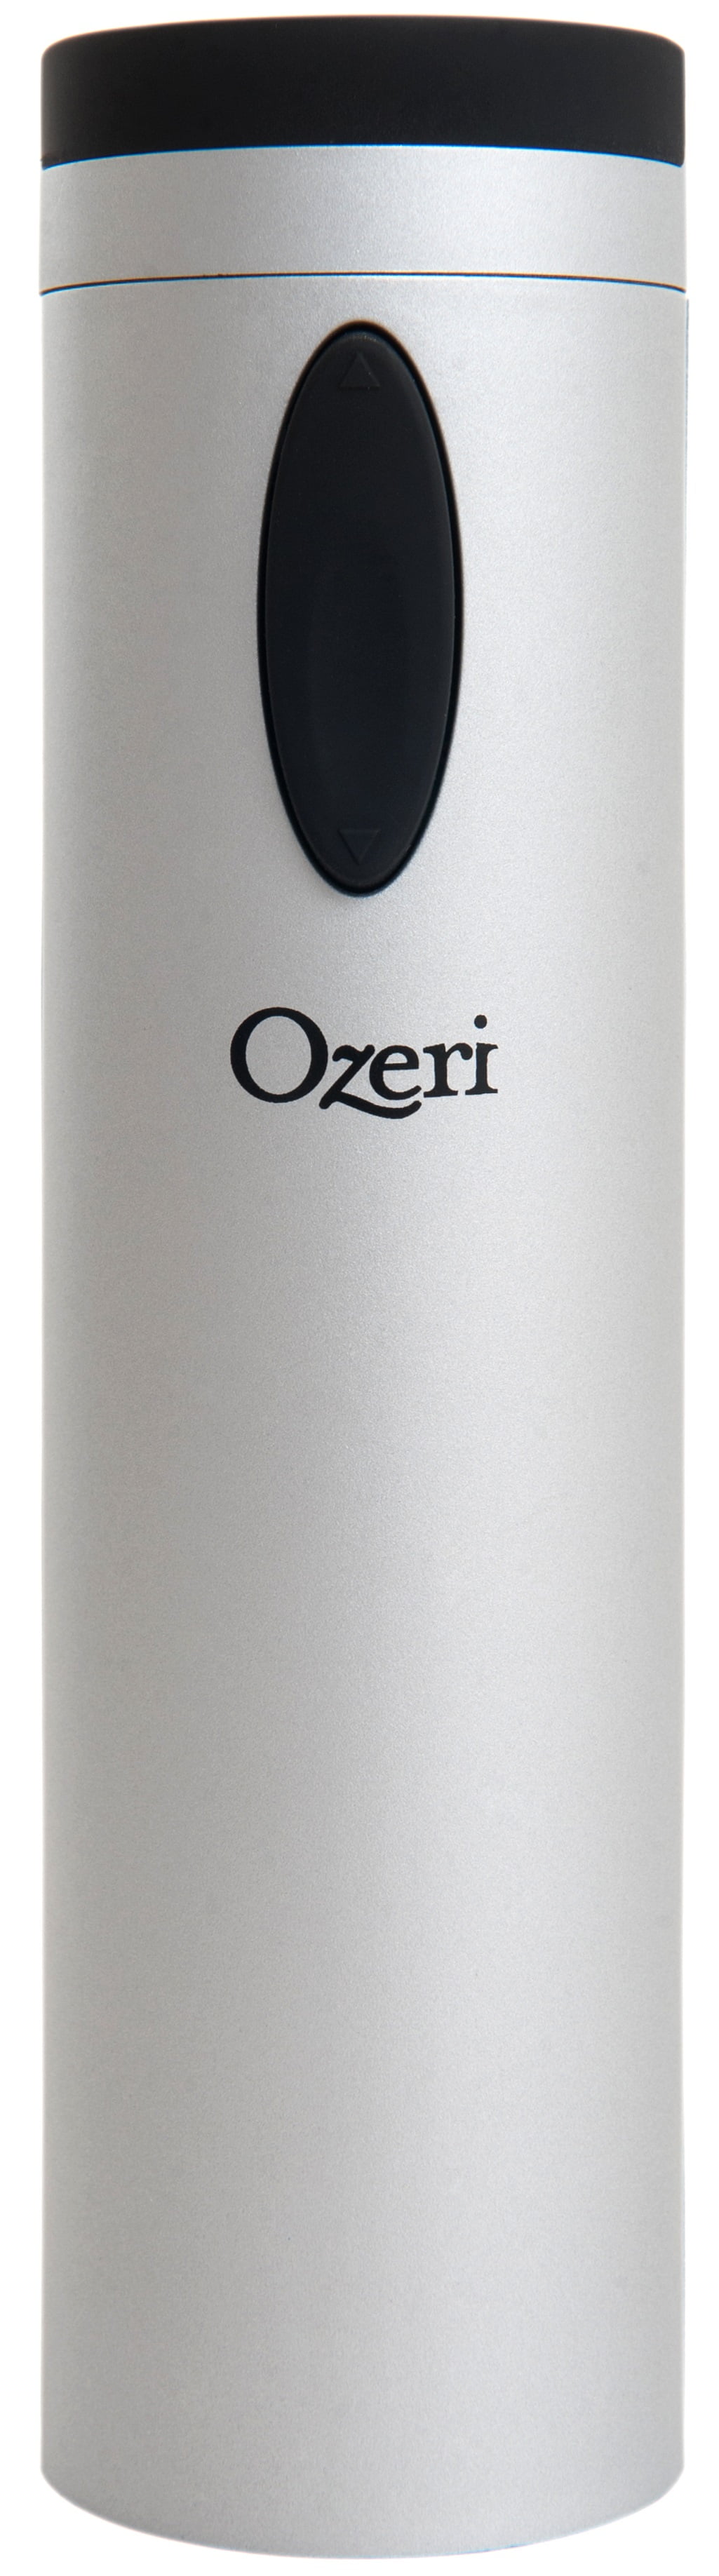 Ozeri OW08A Fascina Electric Wine Bottle Opener and Corkscrew Silver 